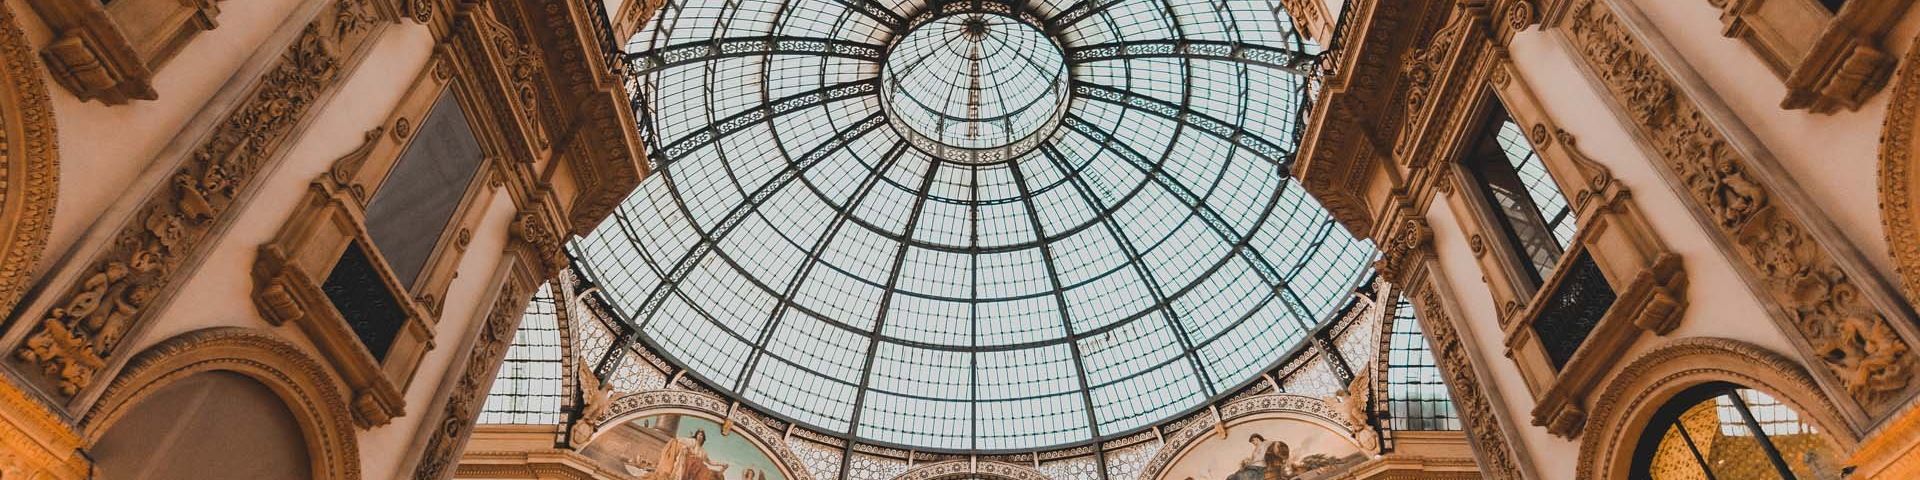 An ornate building from the inside, with a glass domed ceiling